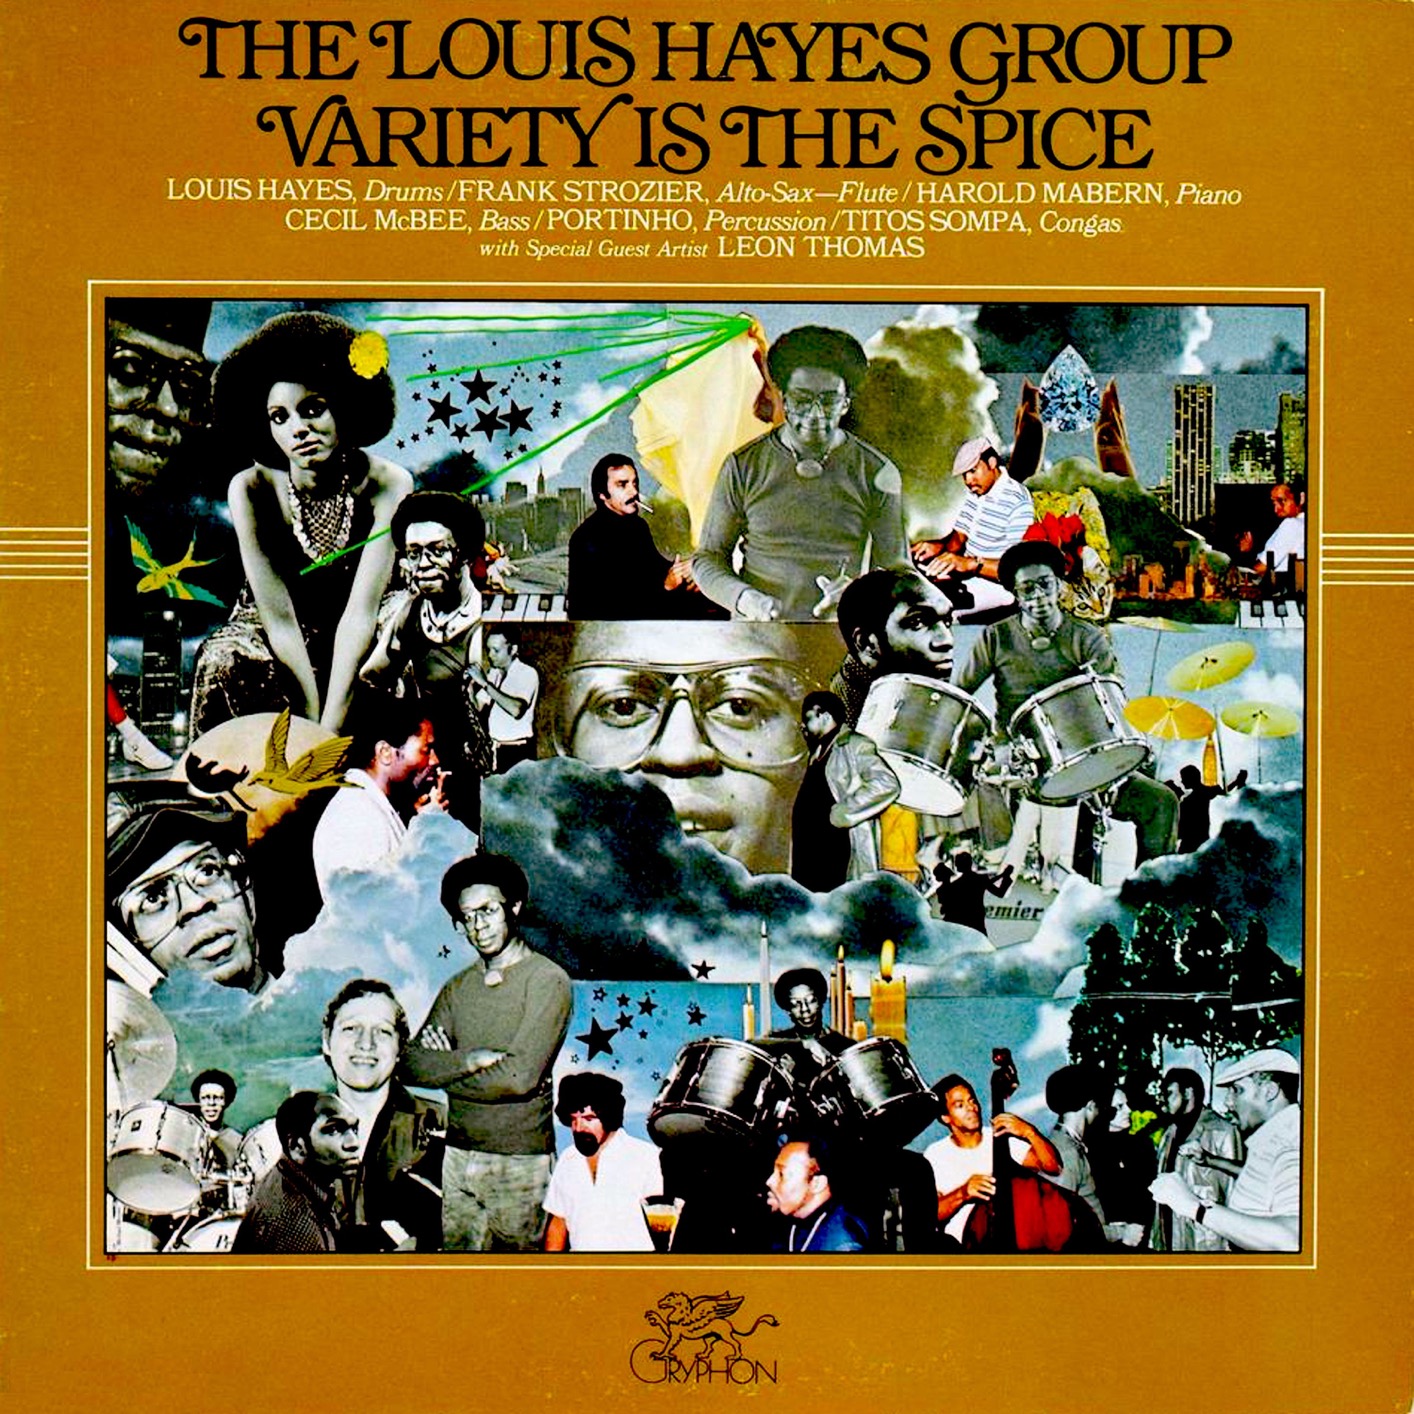 The Louis Hayes Group – Variety is the Spice (1979/2019) [FLAC 24bit/96kHz]